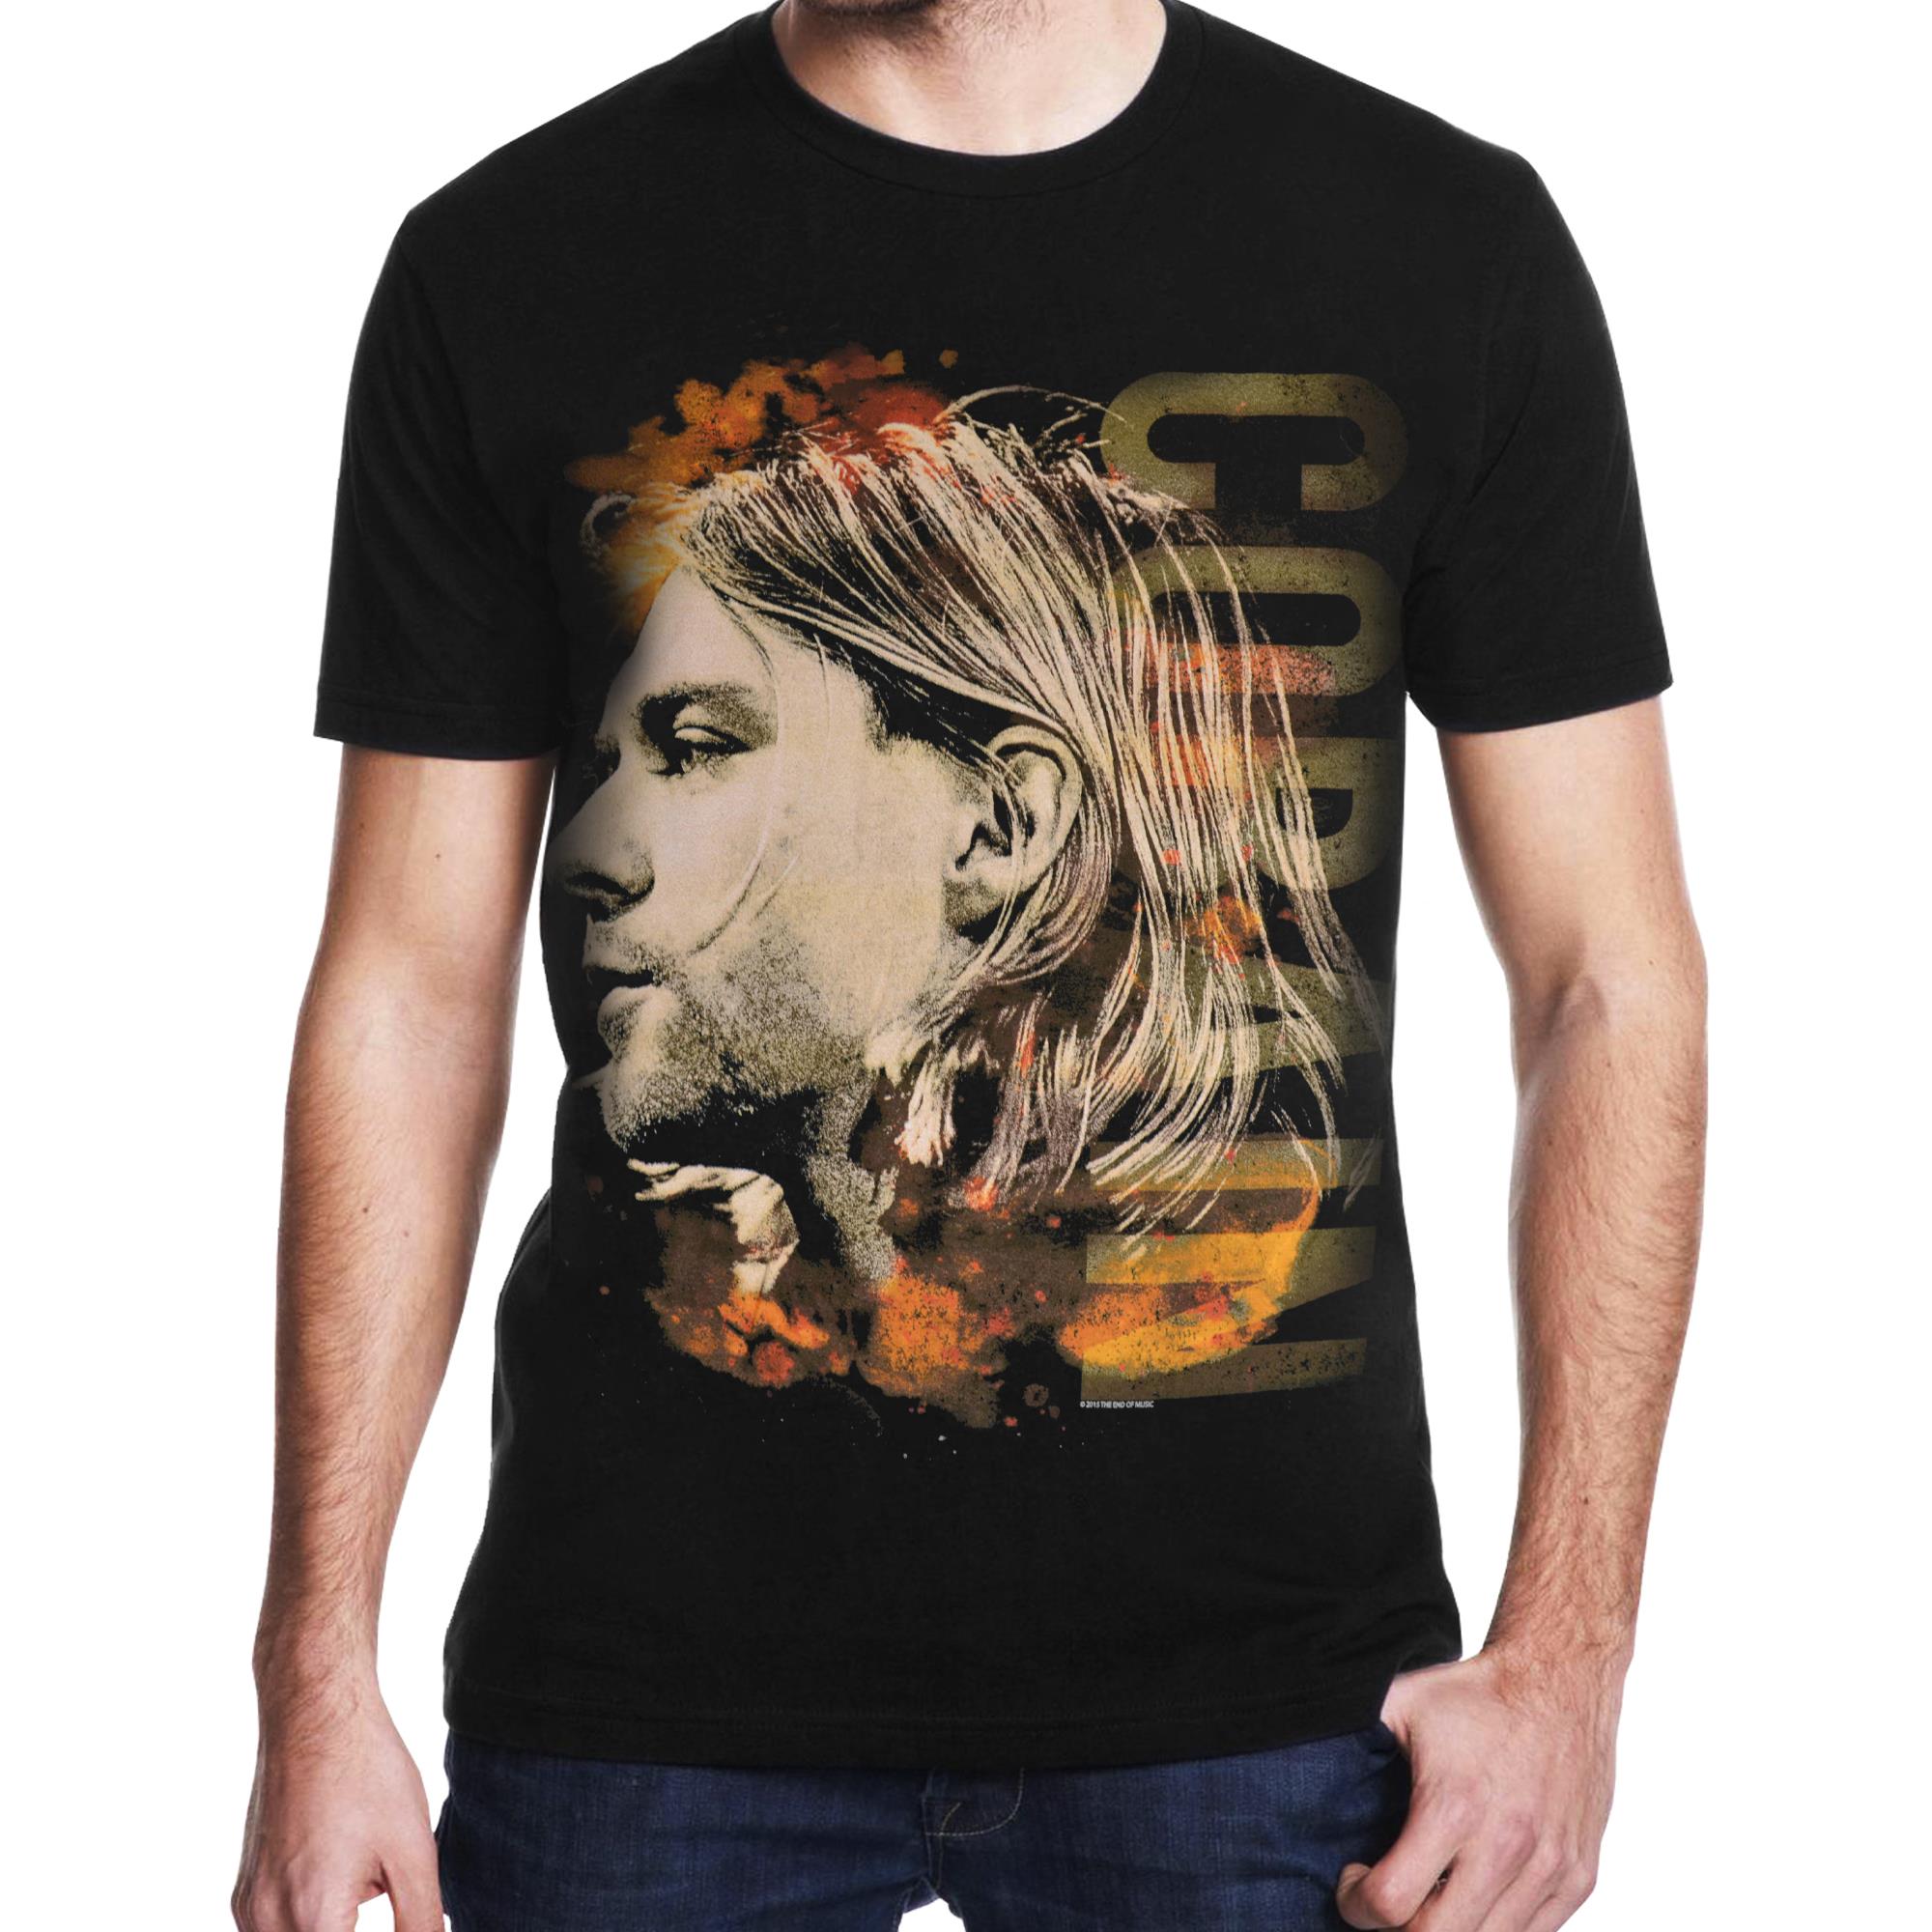 Official Band Shirts  The Best Licensed Rock Music T-Shirts and Band Merch